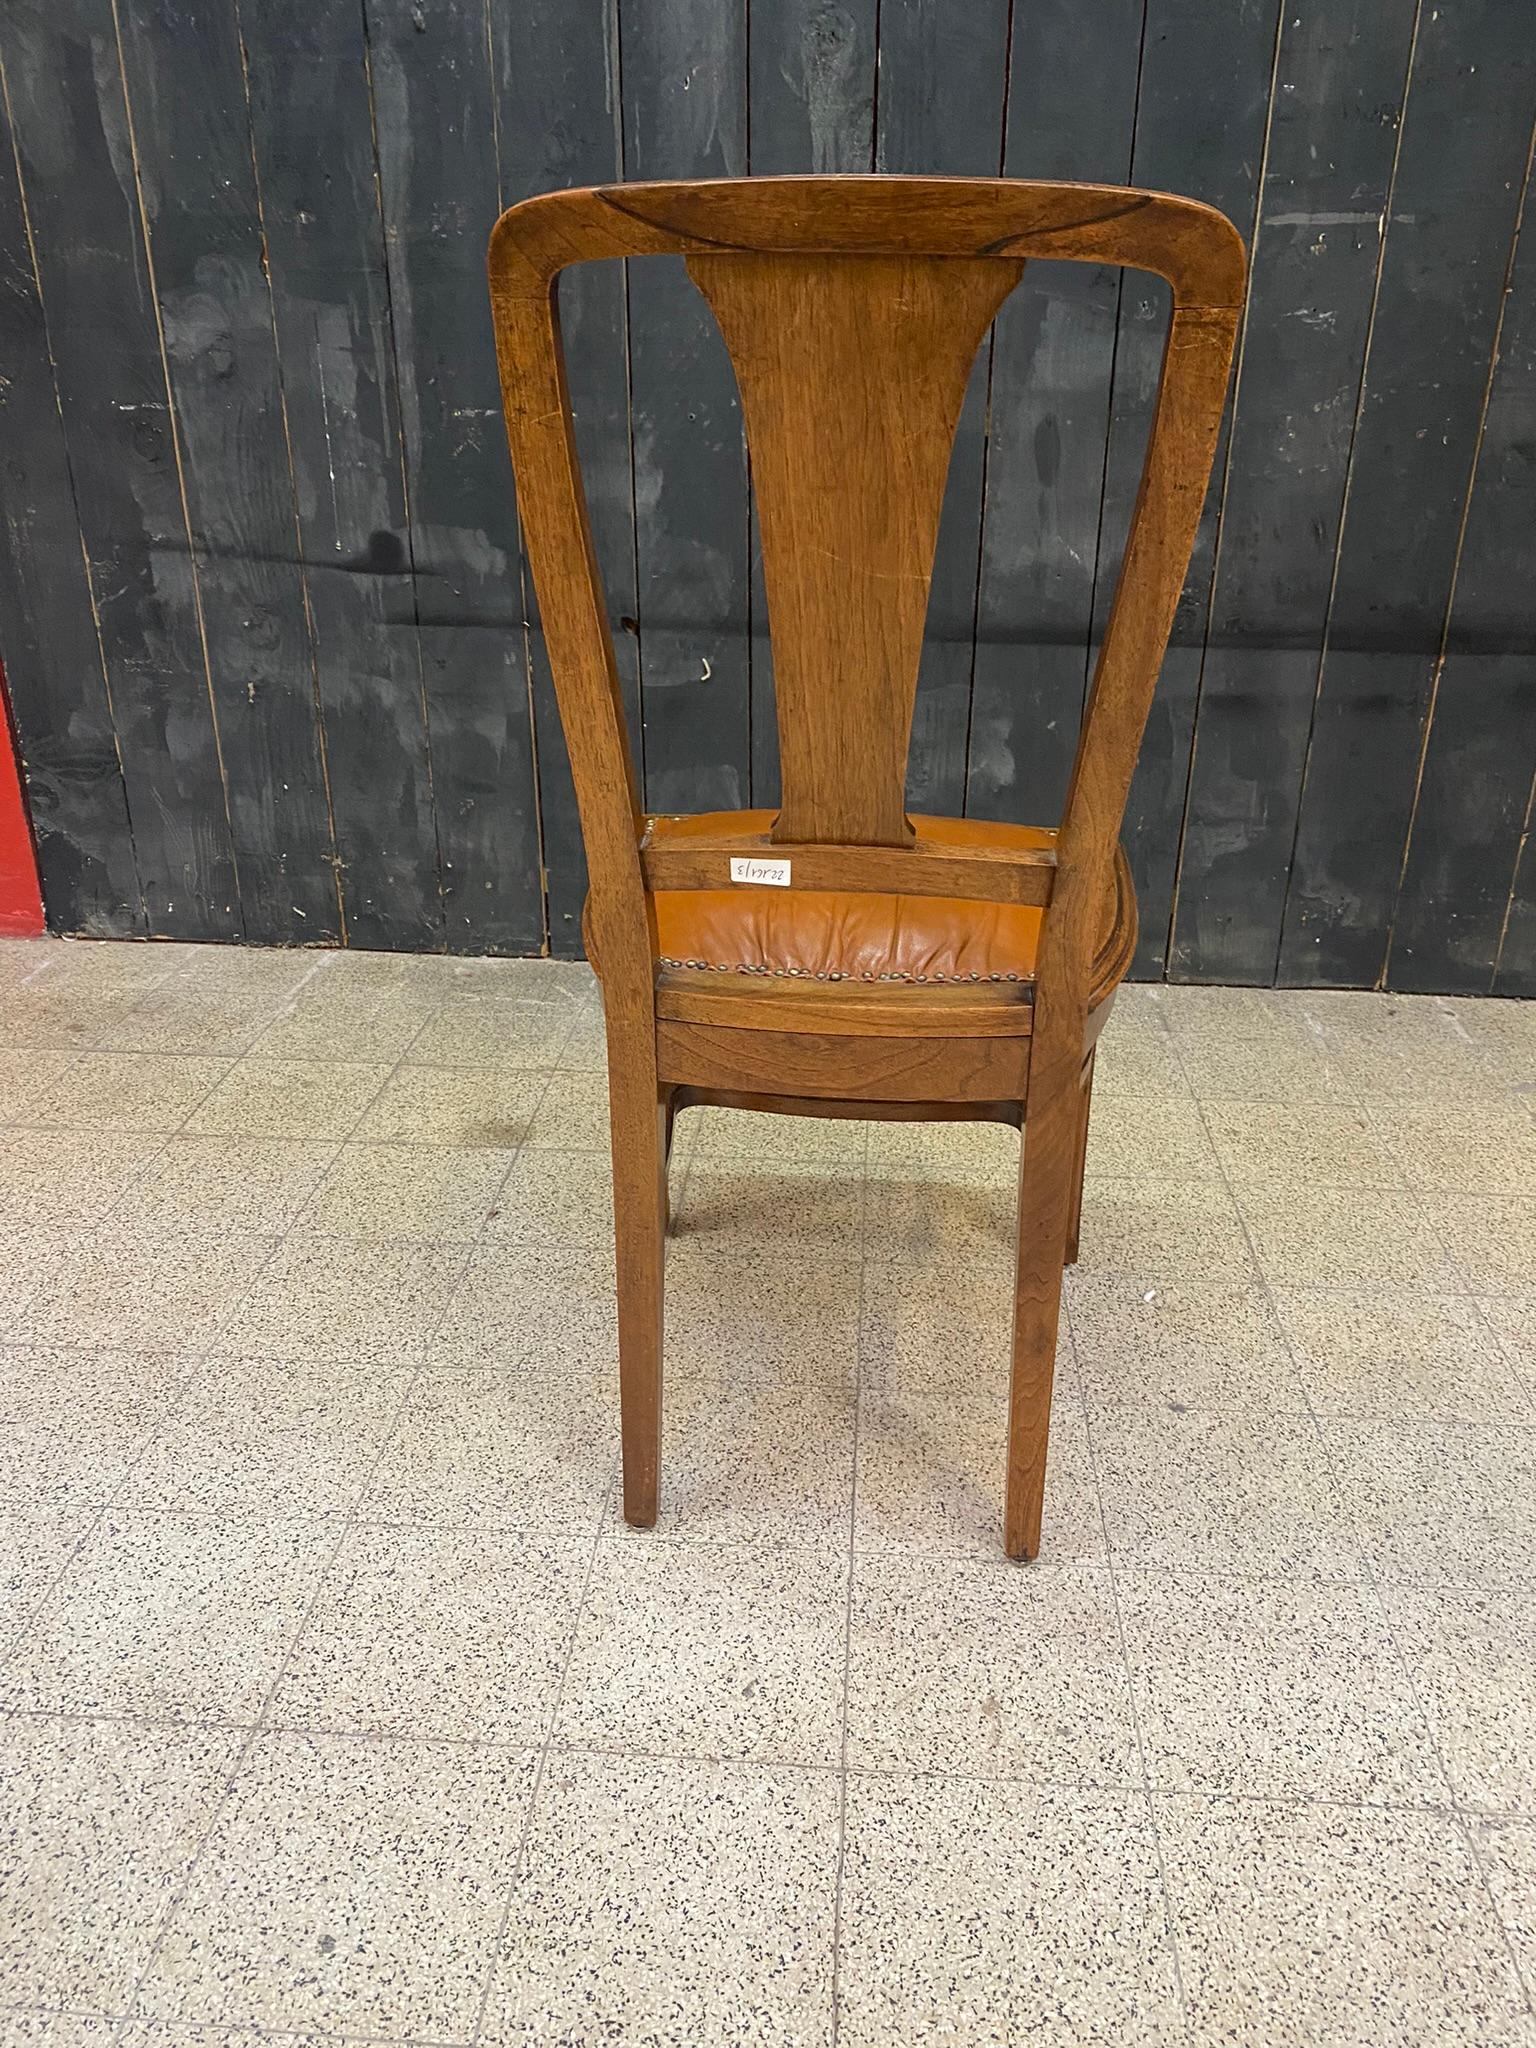 Attributed to Gauthier-Poinsignon & Cie, 6 Art Nouveau Chairs Leather Seats 5